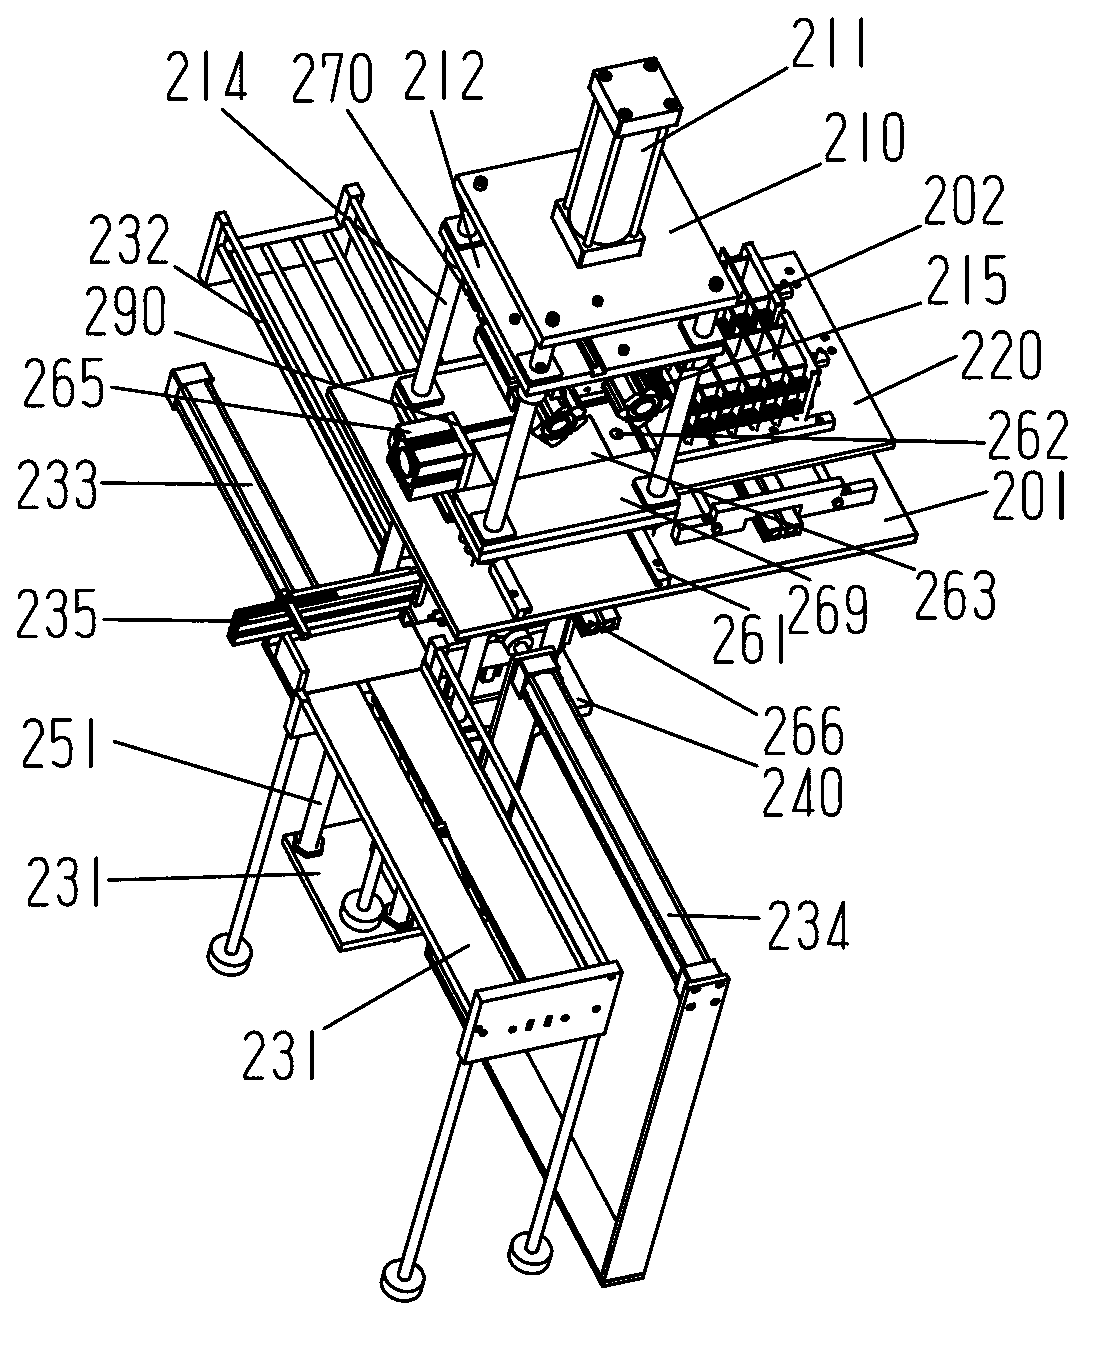 Storage battery production device